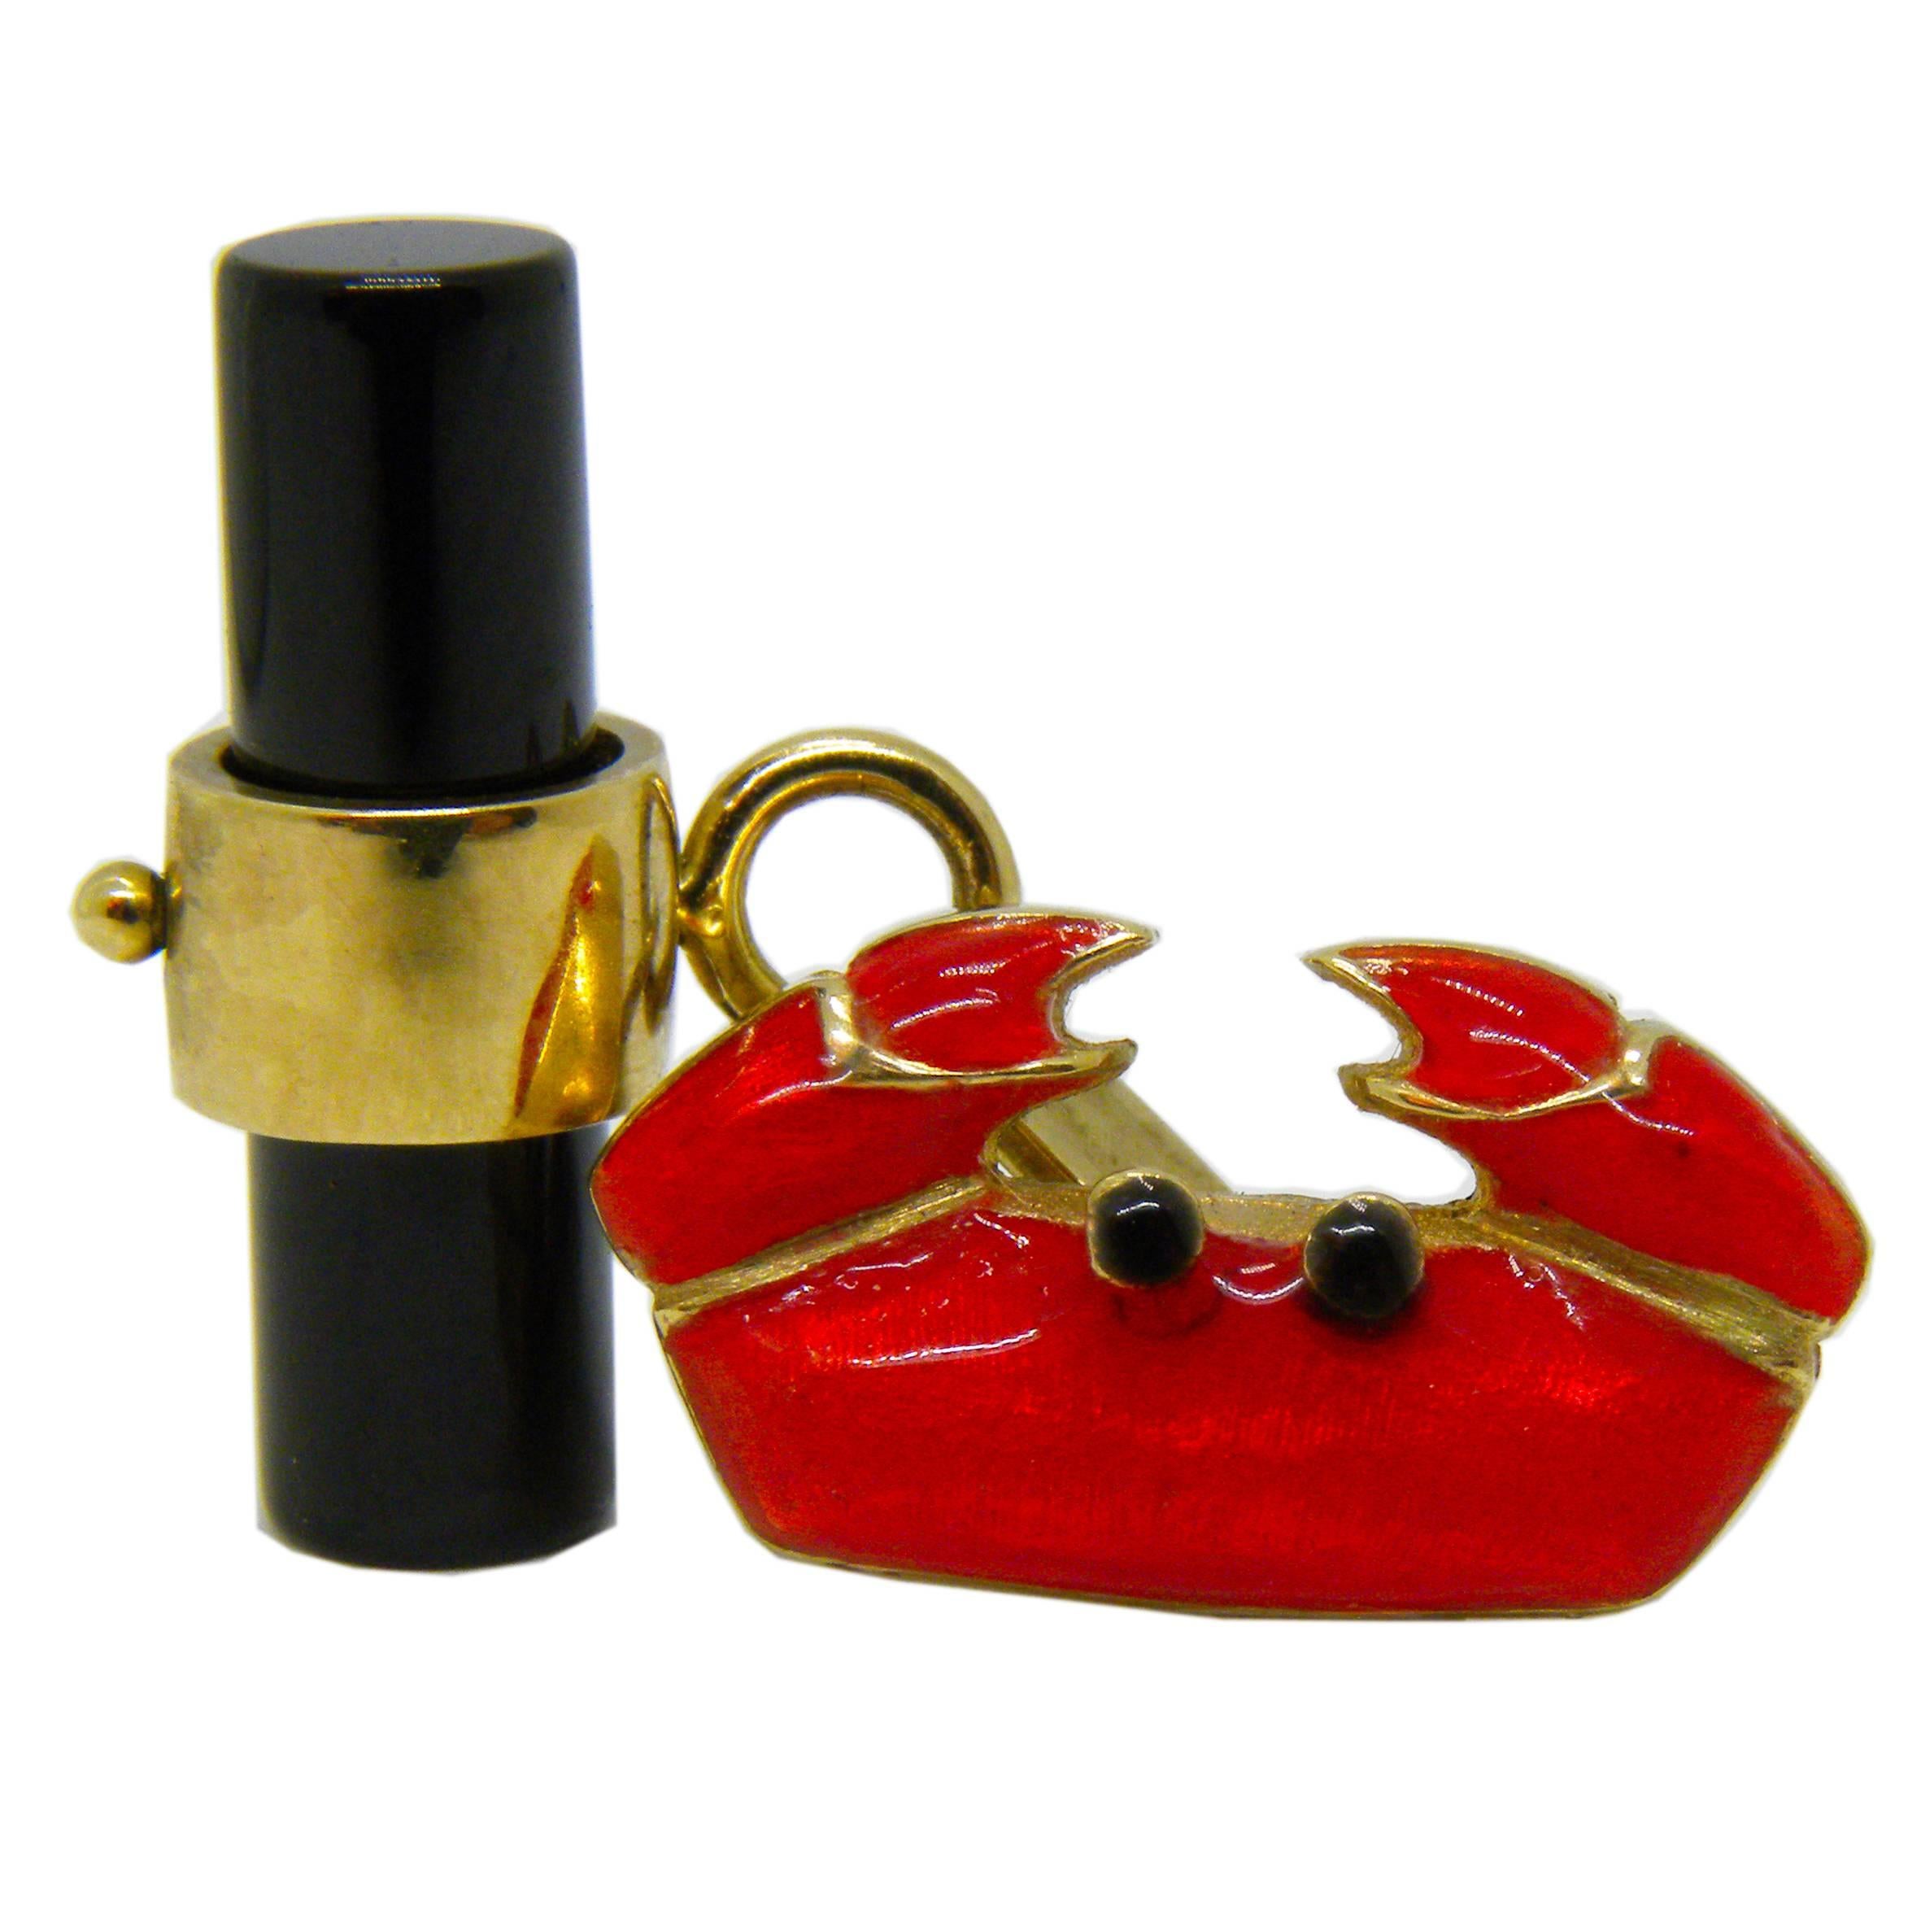 Unique and Chic Hand Enamelled Red Crab, Cancer Zodiac Sign Shaped Yellow Gold Cufflinks, Hand Inlaid Onyx stick back.
In our smart suede tobacco case and pouch.